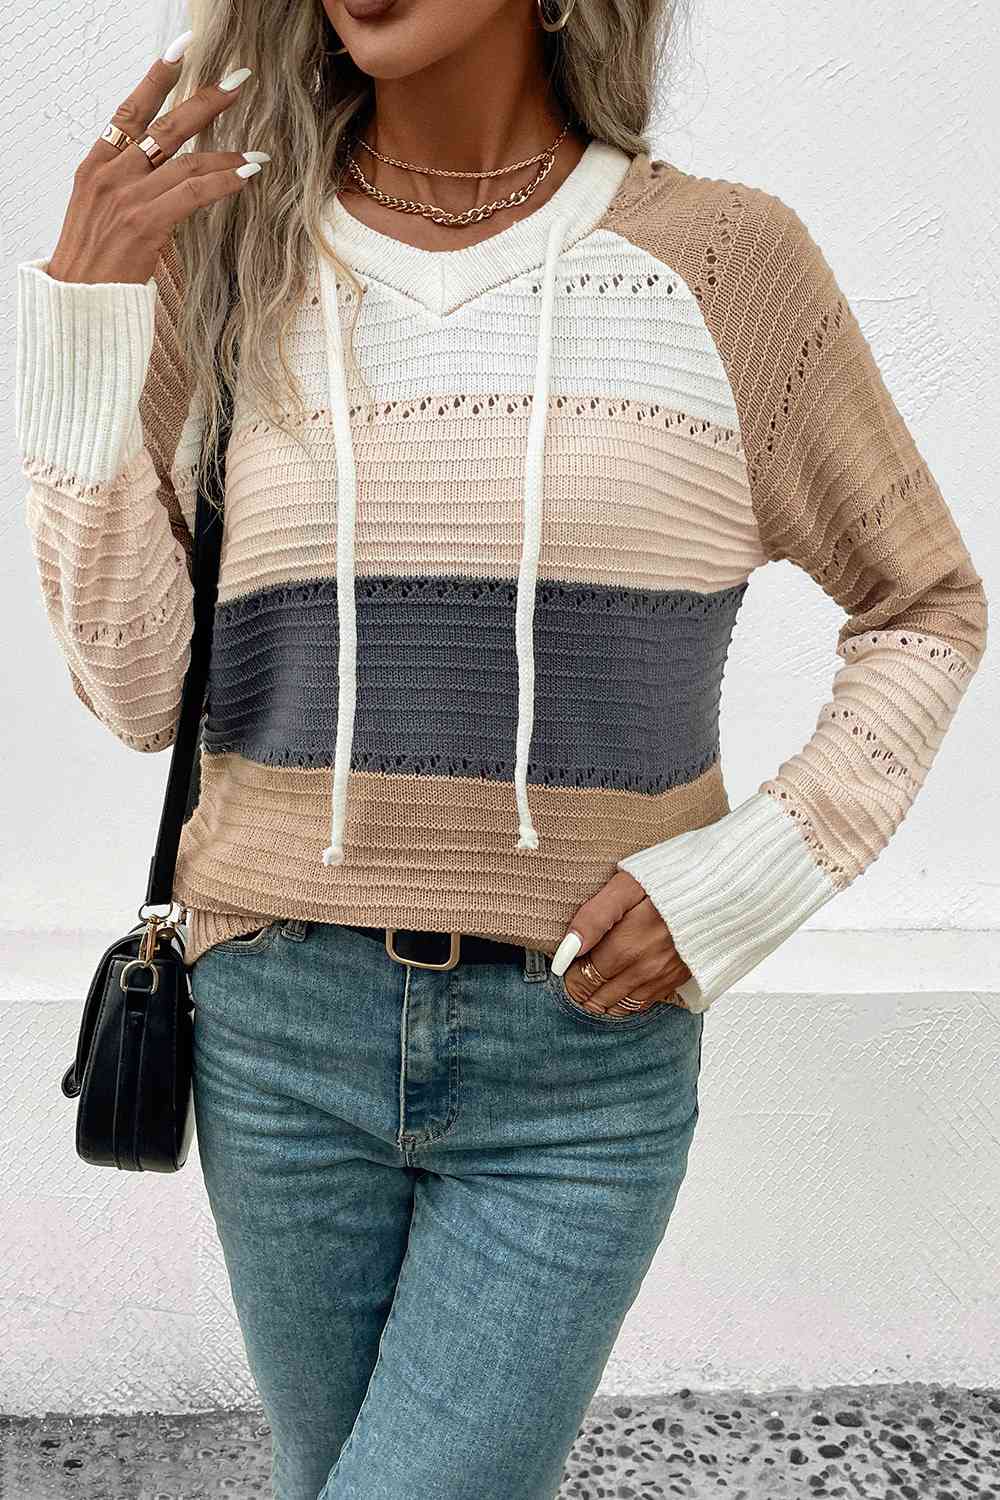 Swiss Coffee Hooded Sweater - Cheeky Chic Boutique